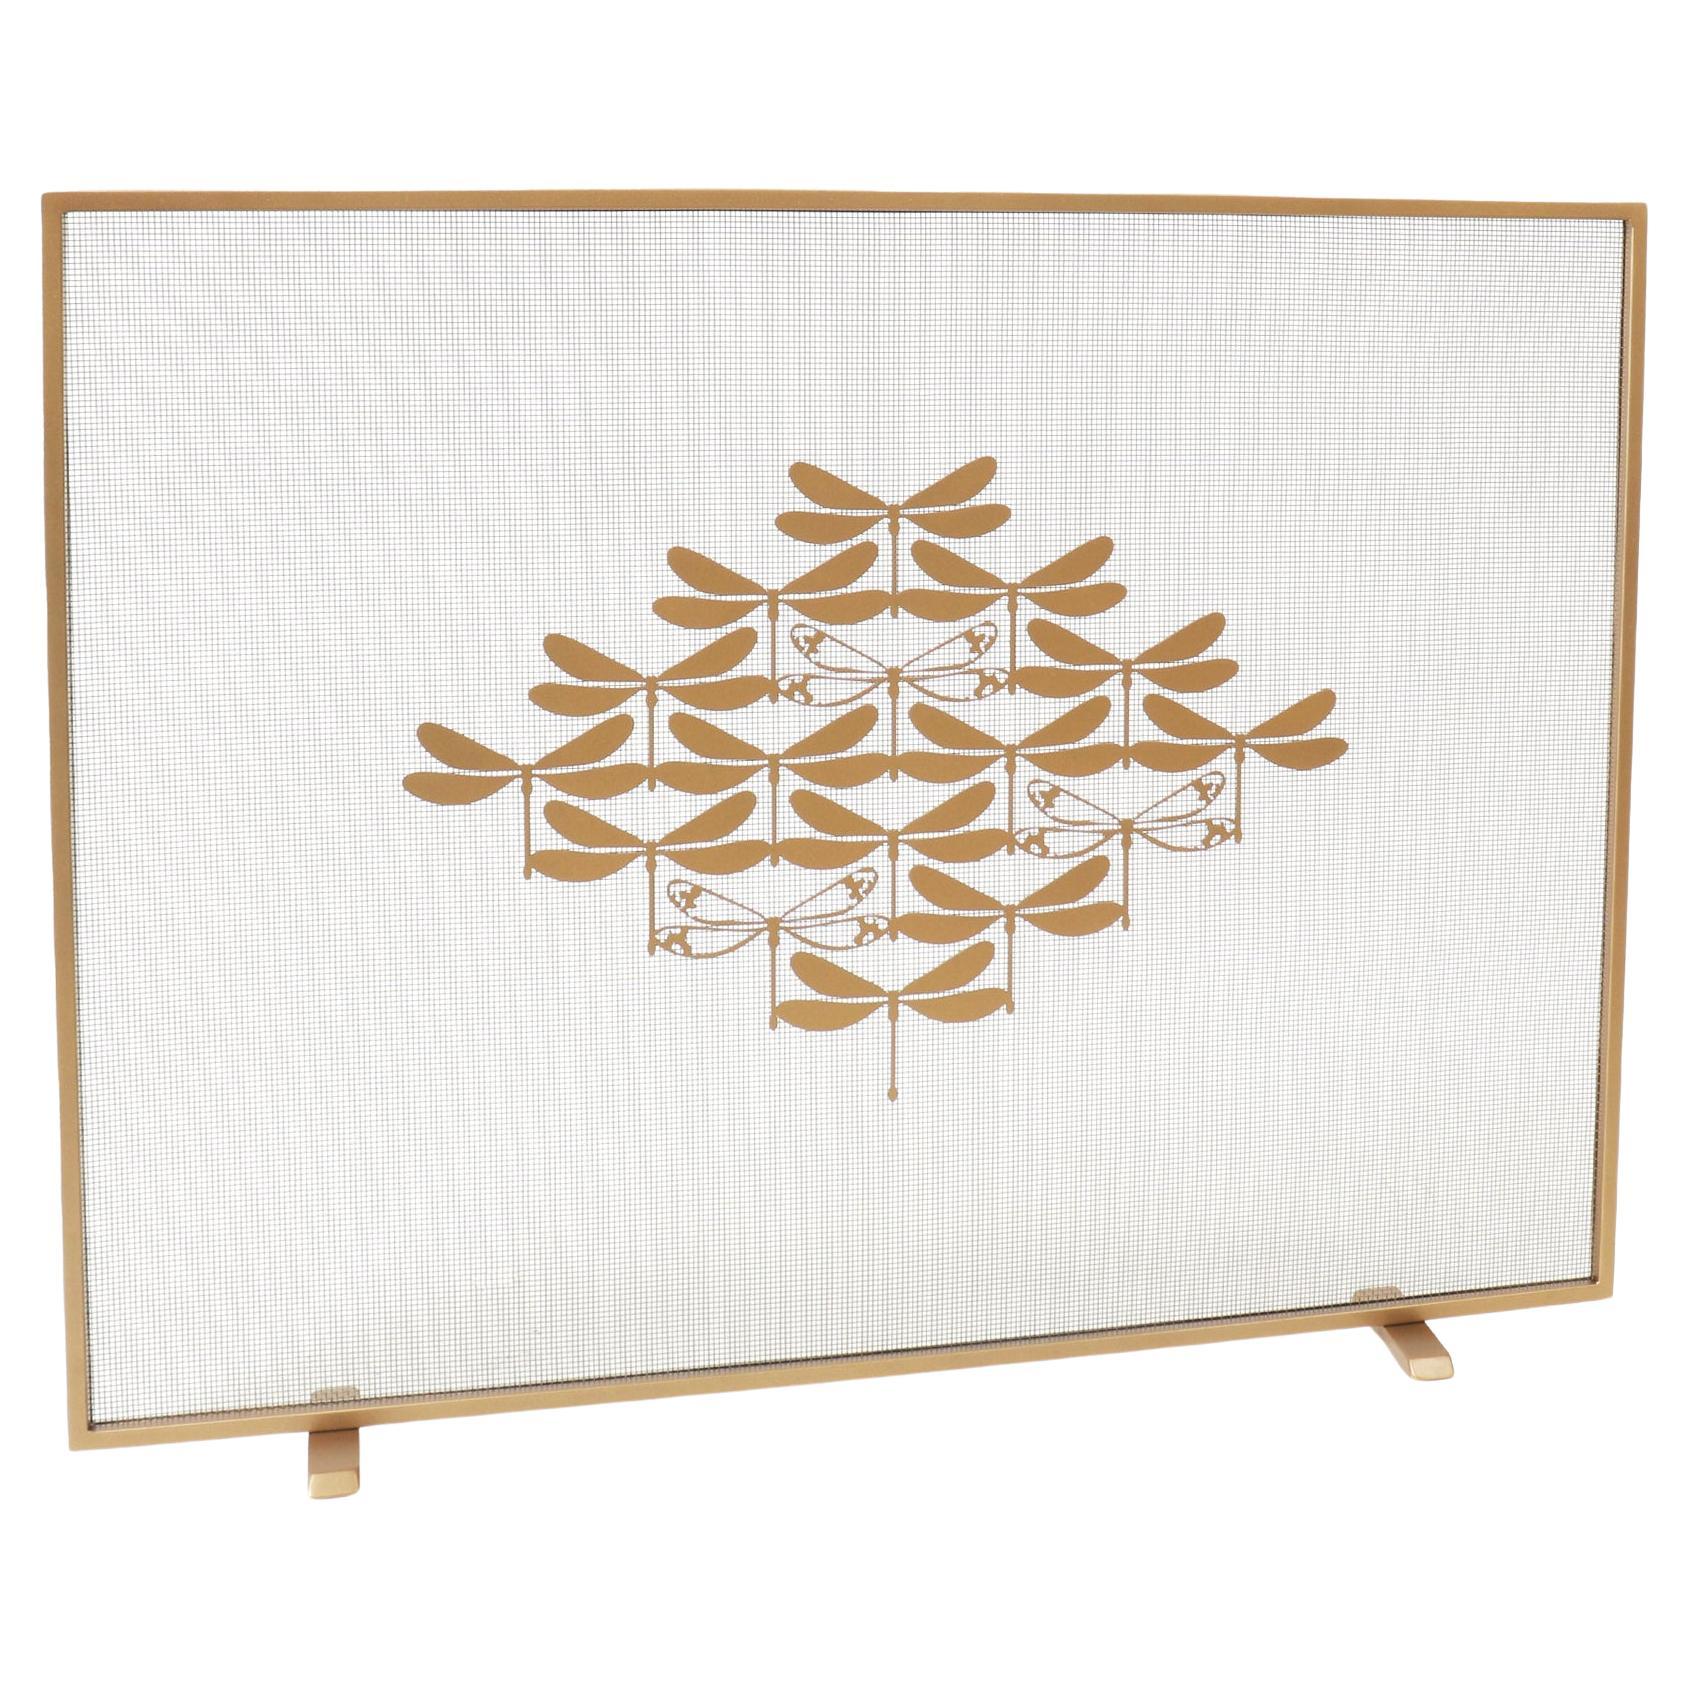 Dragonfly Diamond Fire Screen in a Gold Finish